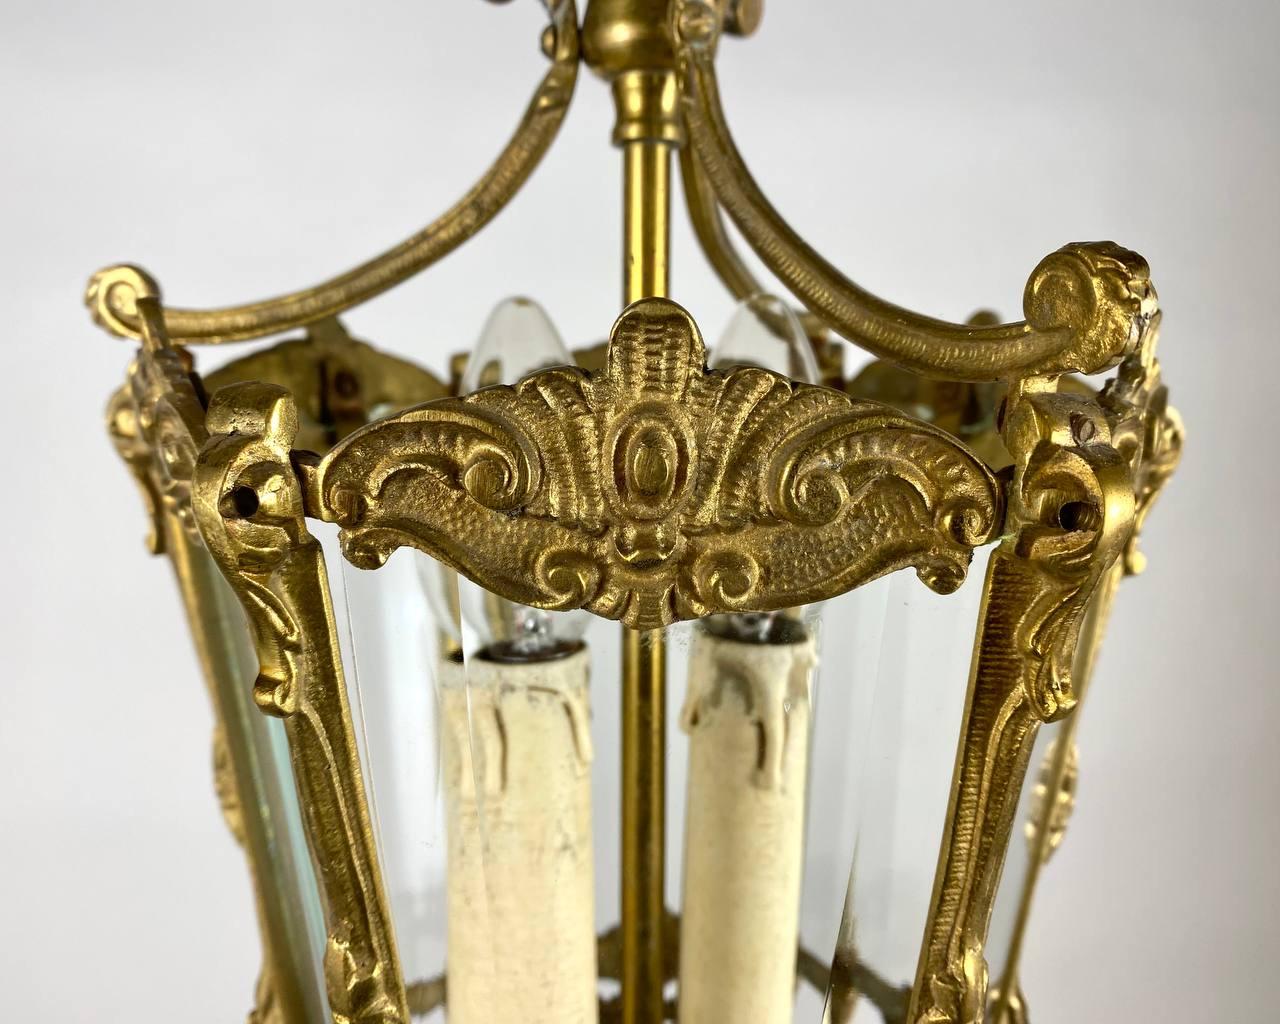 Rare Antique Ceiling Lantern in Gilt Bronze with Glass Panels, 1930s For Sale 1